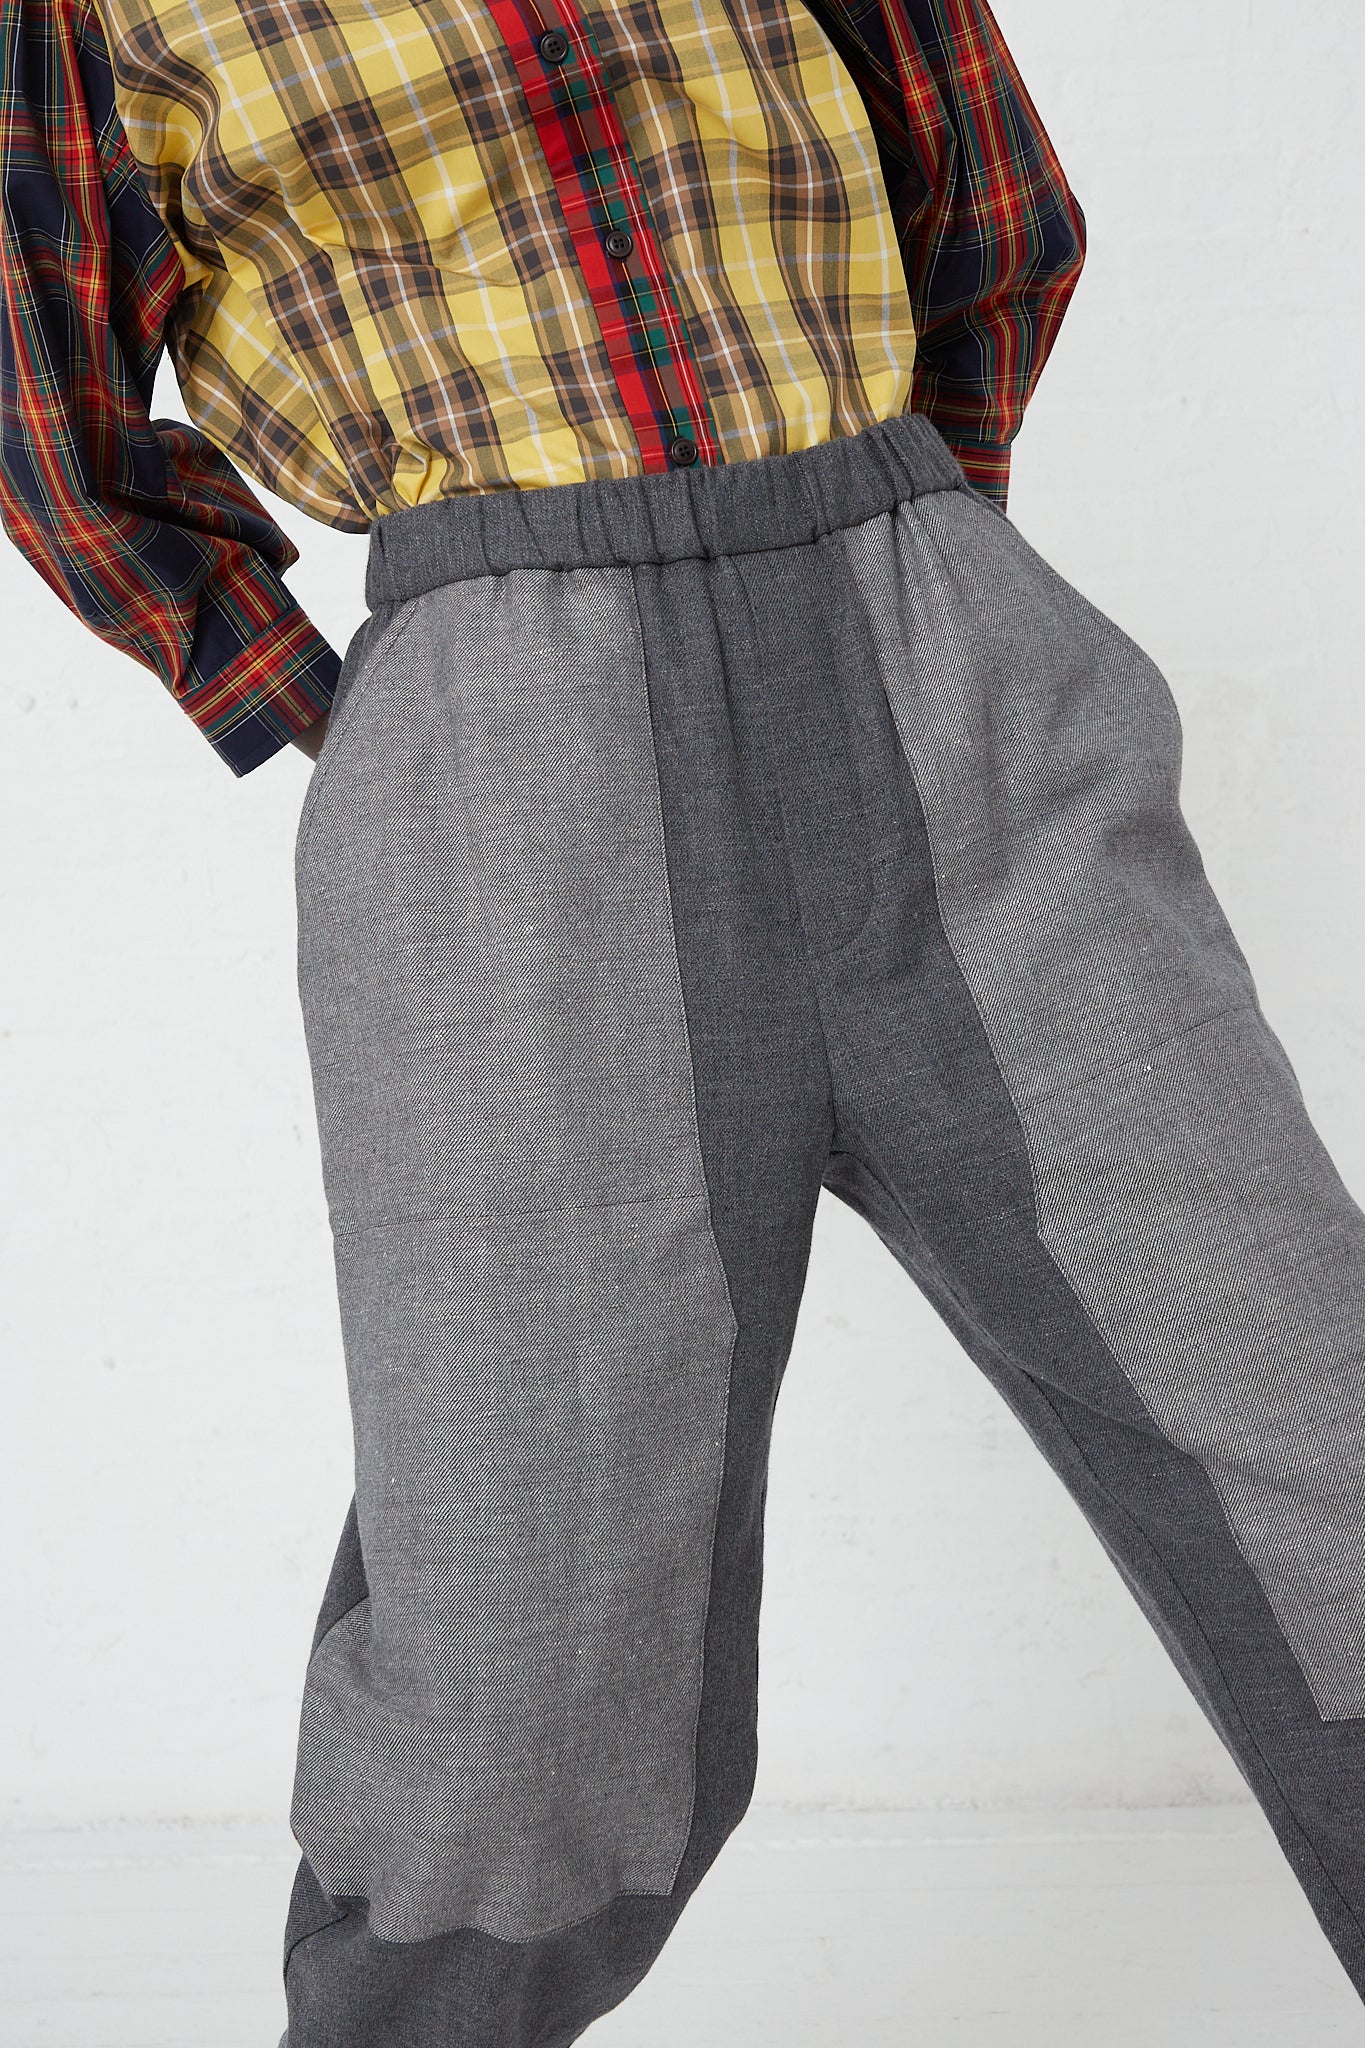 A woman wearing a KasMaria Cotton Linen Flannel Front Patch Pant in Gray with an elasticated waist and a plaid shirt.